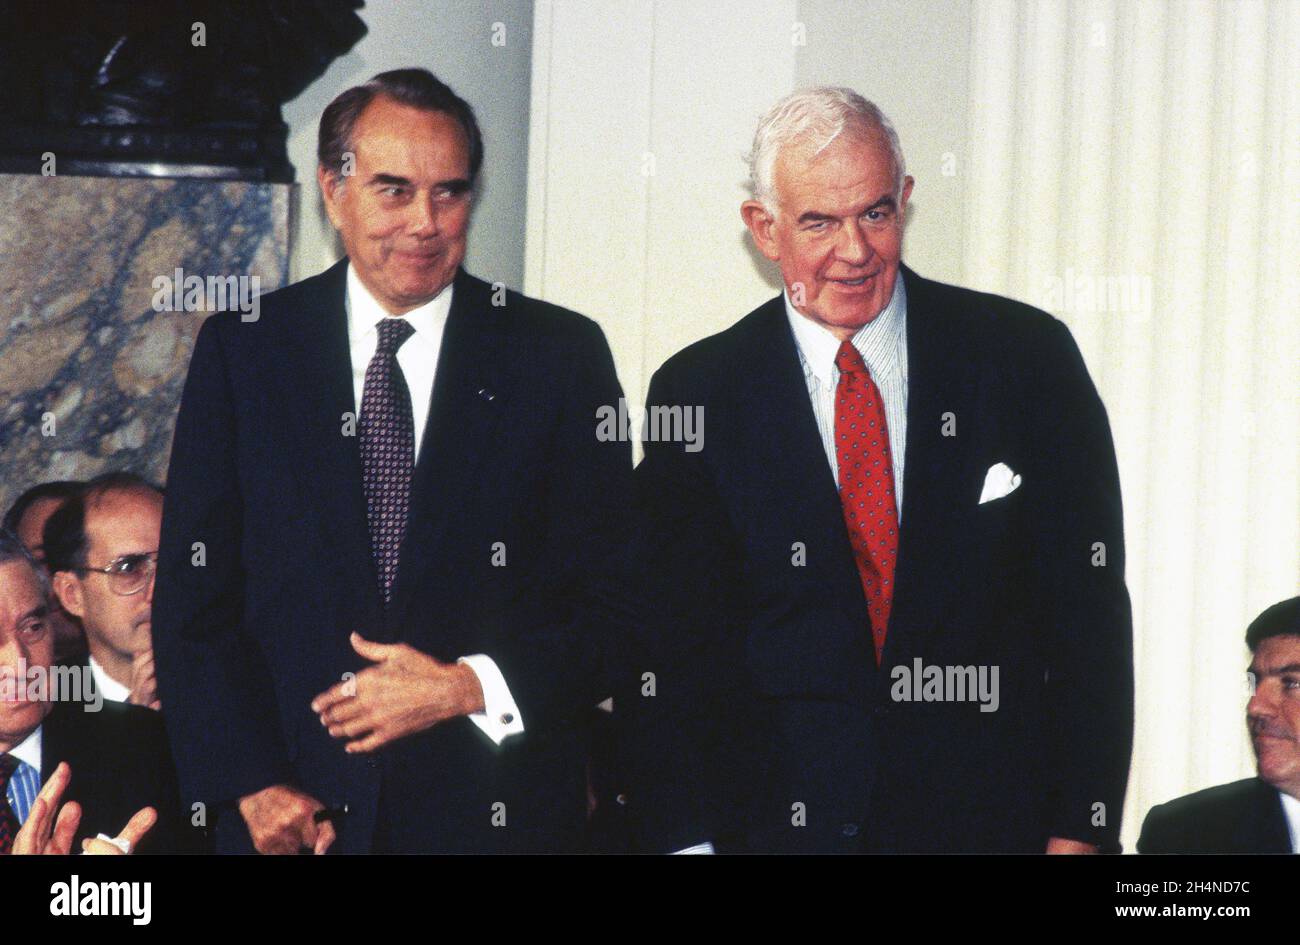 Incoming United States Senate Majority Leader Bob Dole (Republican of Kansas), left, and Speaker of the United States House of Representatives Tom Foley (Democrat of Washington), right, attend the signing of the multinational GATT Treaty at the Organization of American States Building in Washington, DC on Thursday, December 8, 1994.Credit: Ron Sachs / CNP / MediaPunch Stock Photo